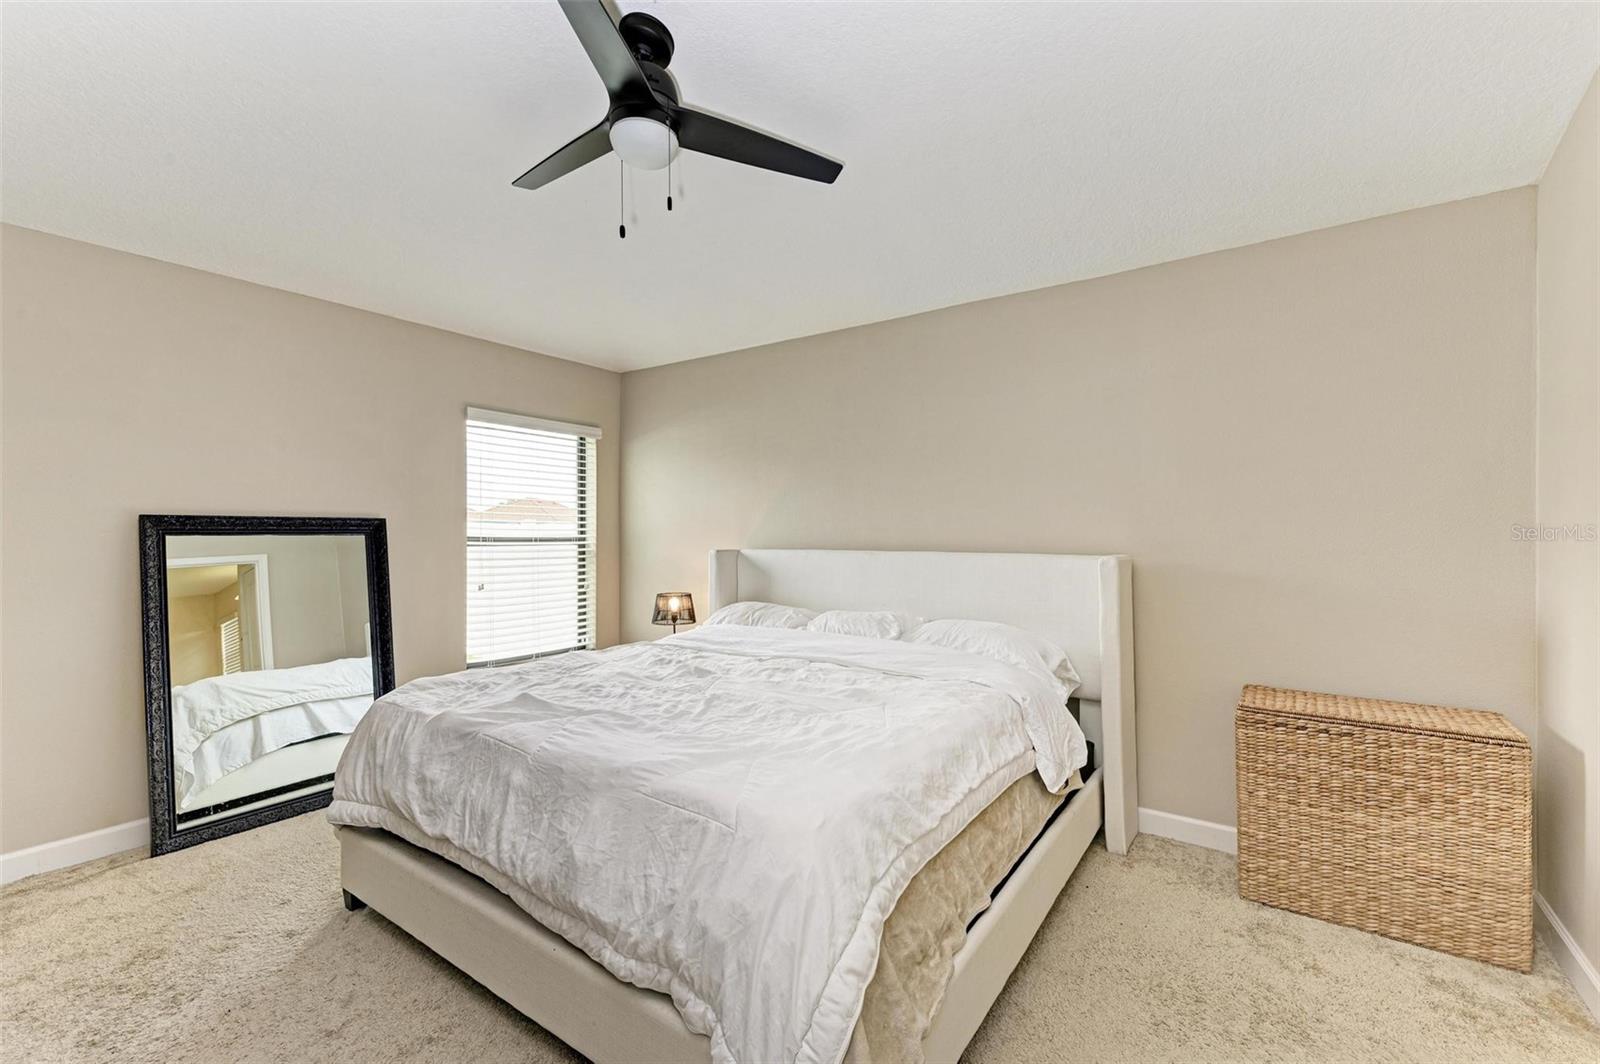 Primary bedroom has neutral paint and modern light fixtures..Beautiful natural light